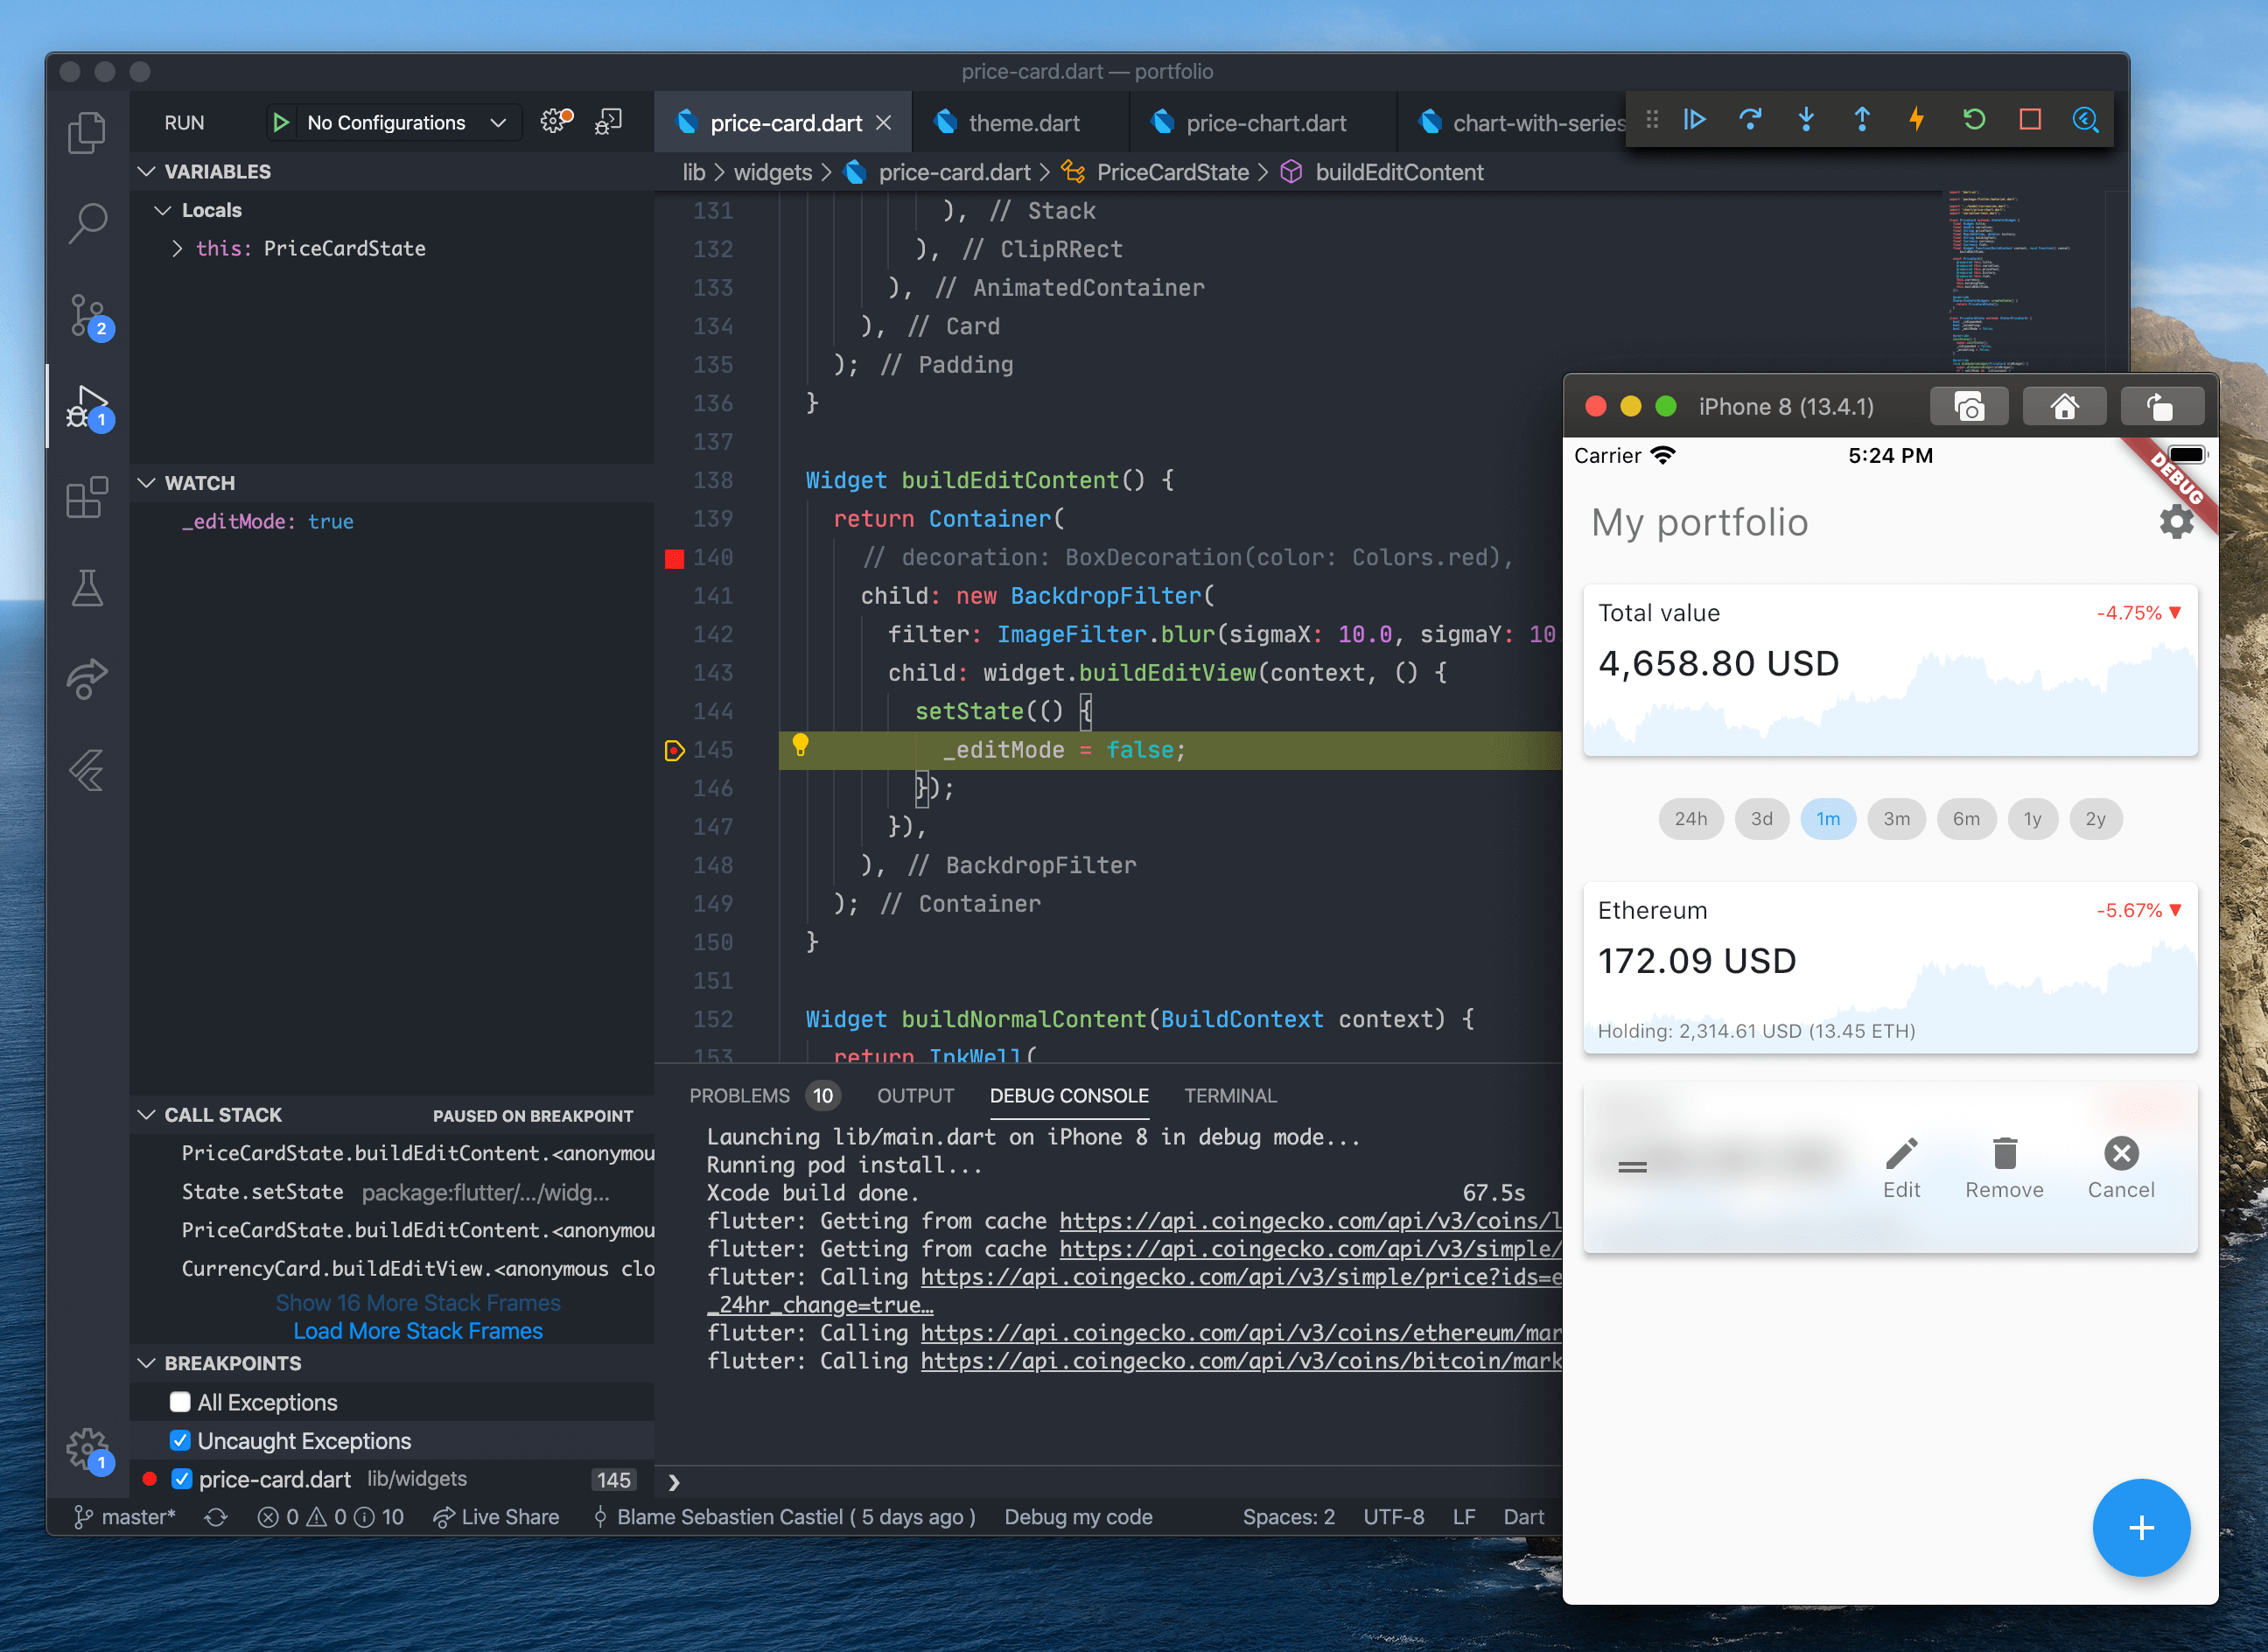 VSCode is perfect to develop with Flutter